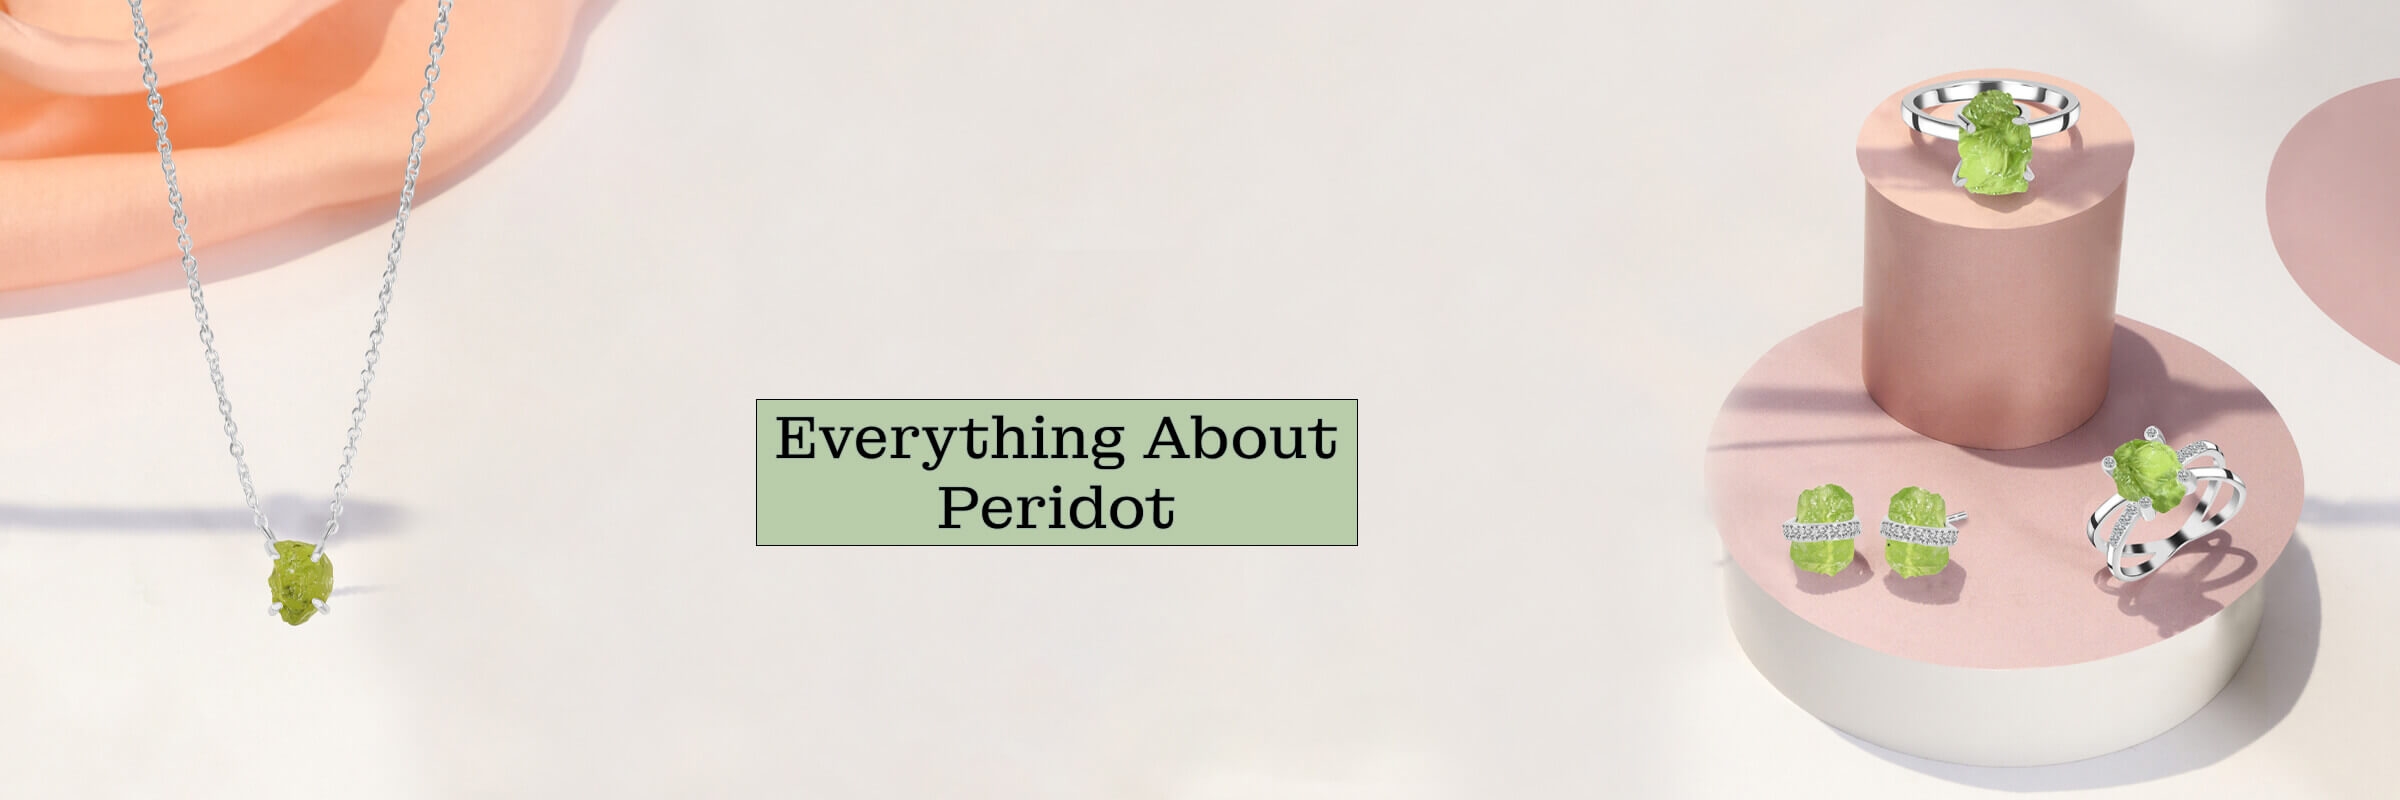 Peridot Healing Properties, Meaning, and History 1